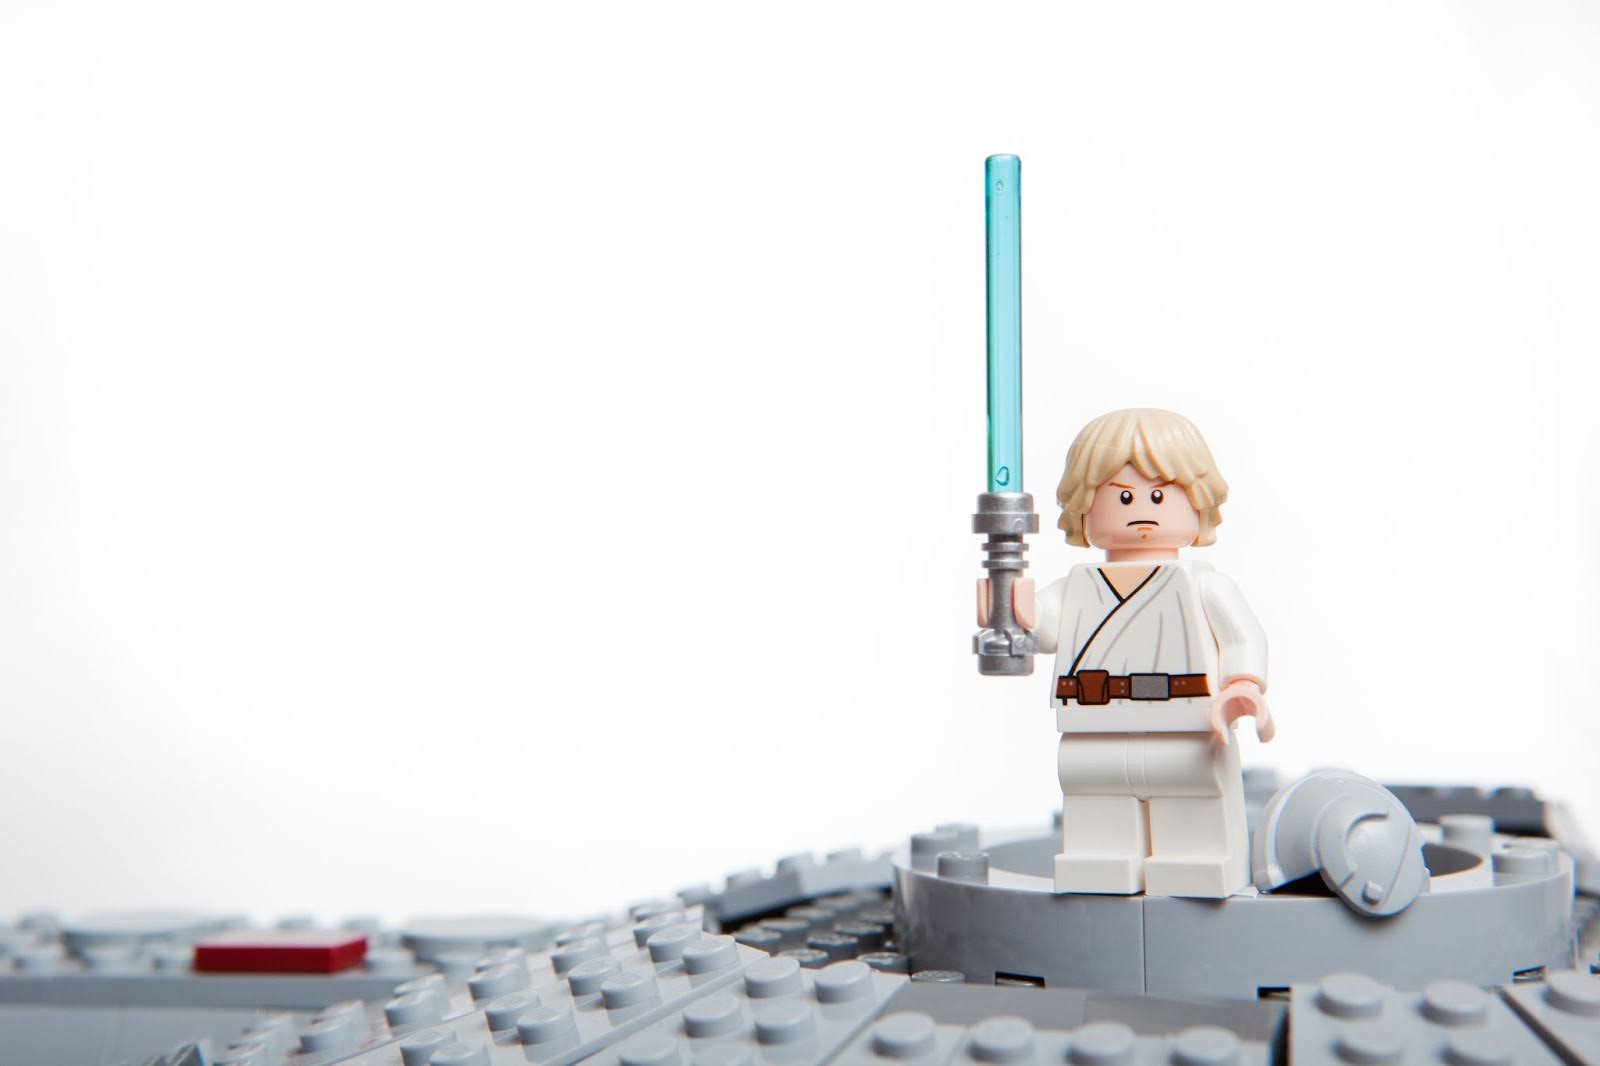 Lego Star Wars may the force be with you 